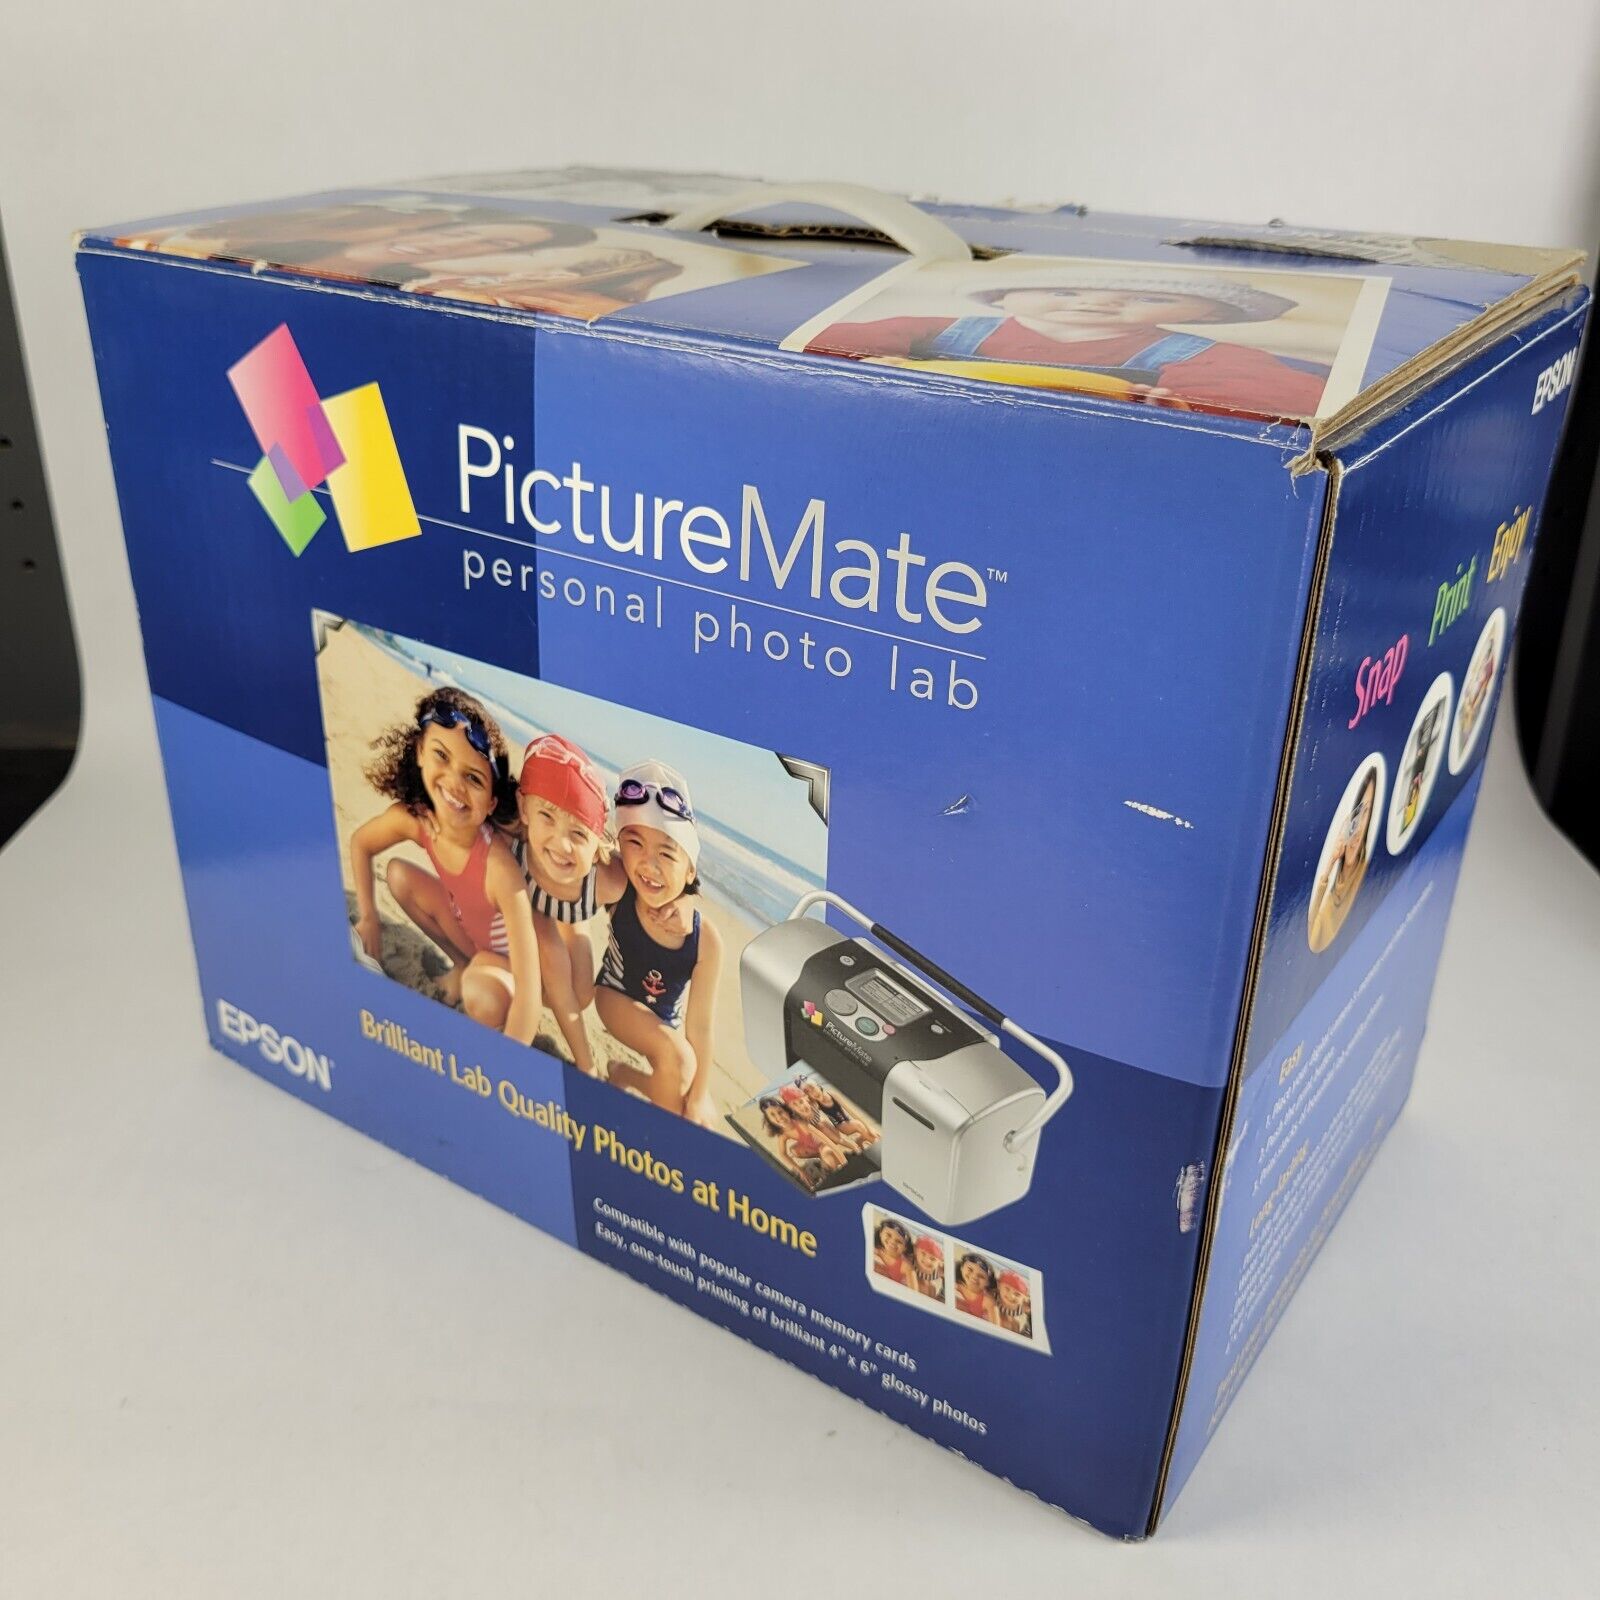 EPSON PictureMate Personal Photo Lab Printer Tested Working